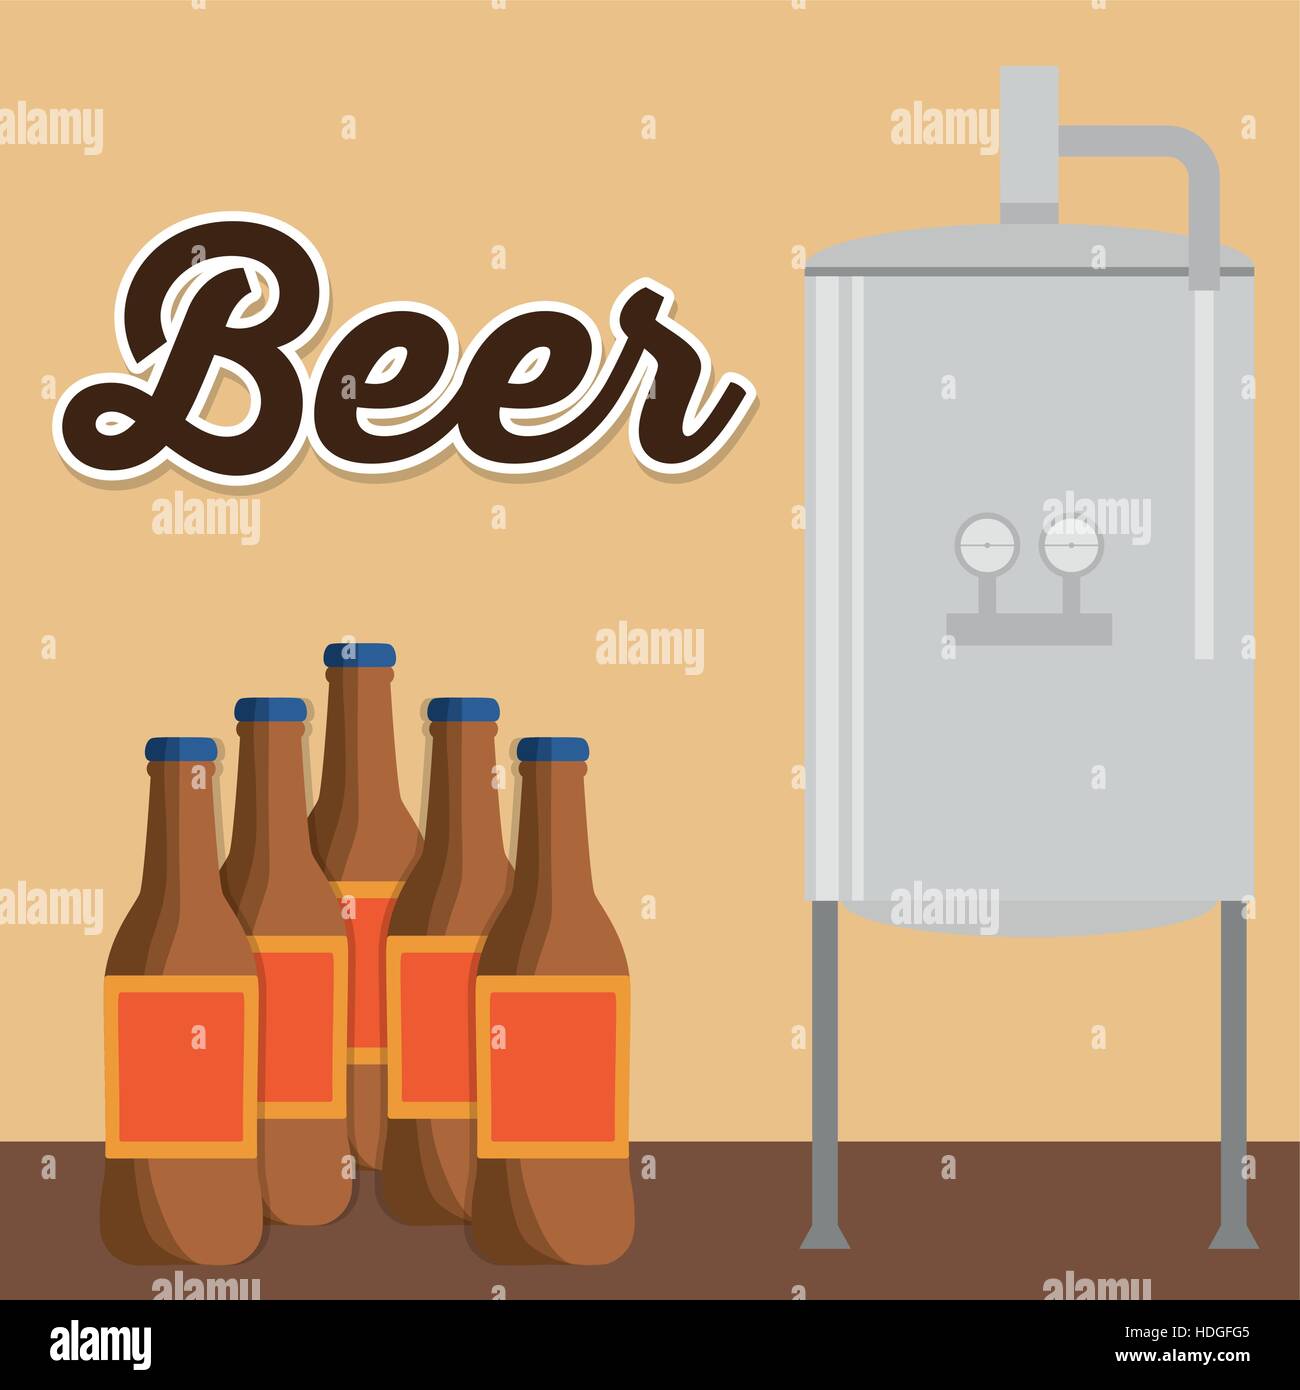 brewery beer bottles production poster vector illustration eps 10 Stock Vector